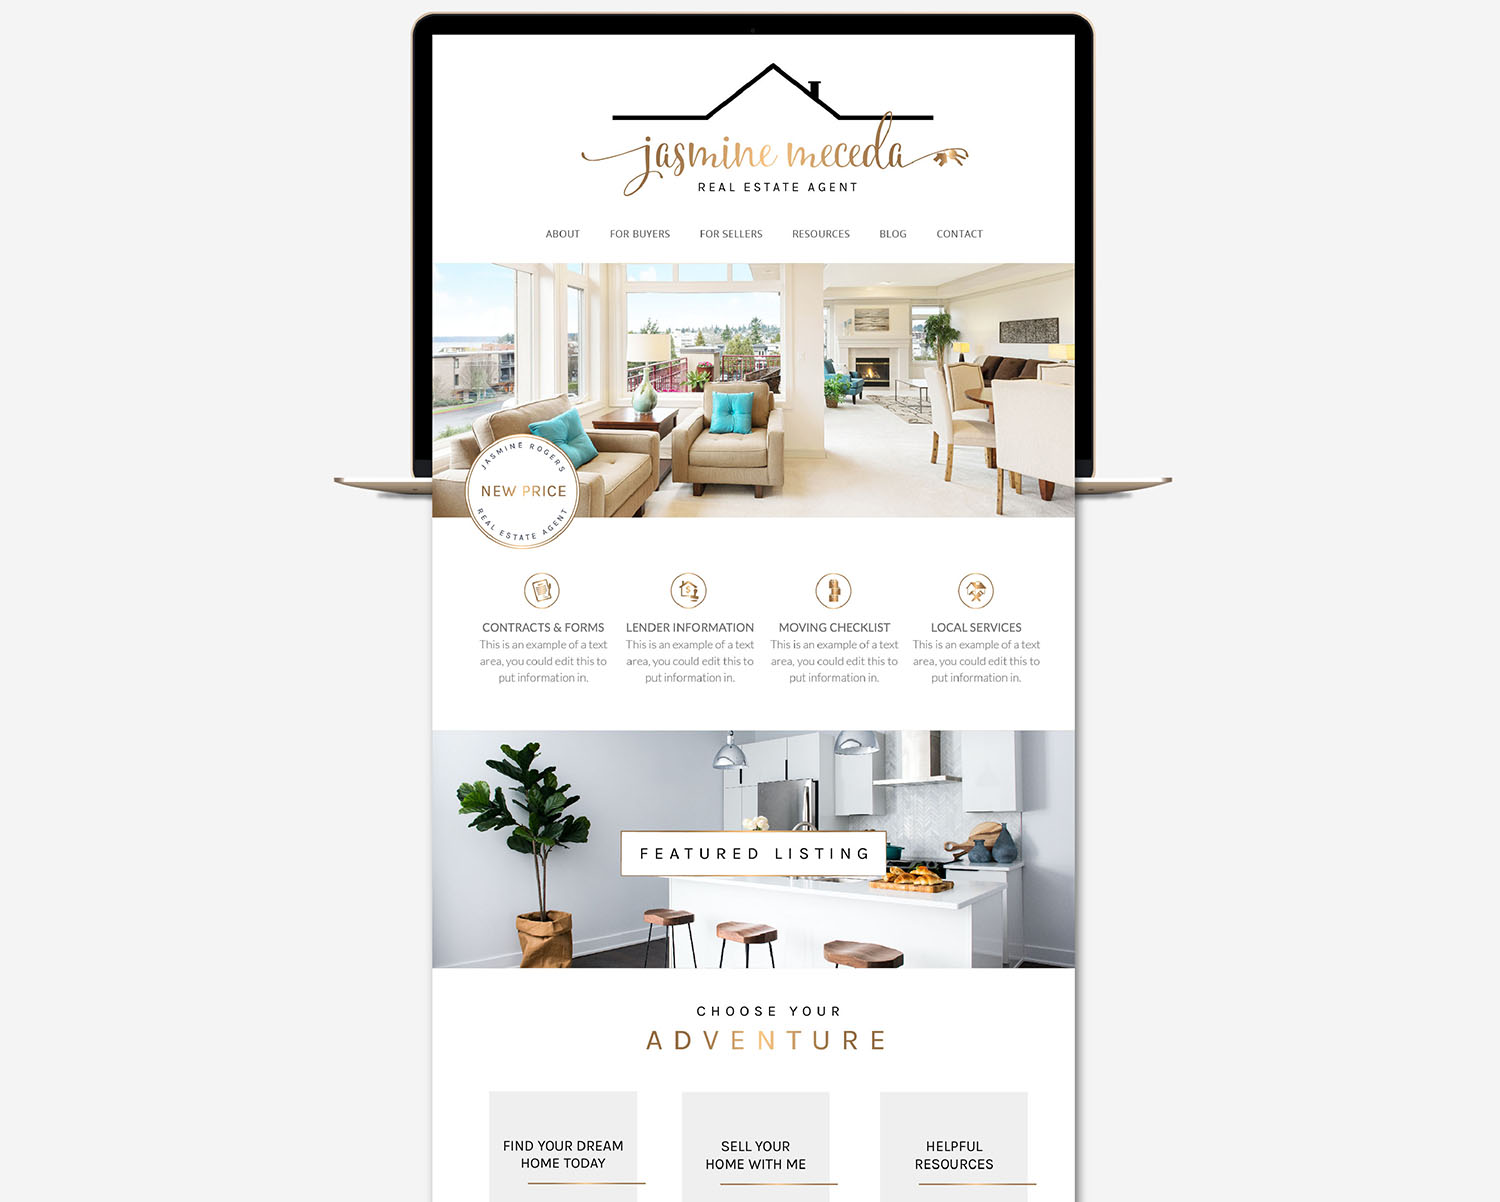 Real Estate Website Template, Real Estate Wordpress Theme, Realtor Website, Realty Company Website, Web Kit for Real Estate Agents